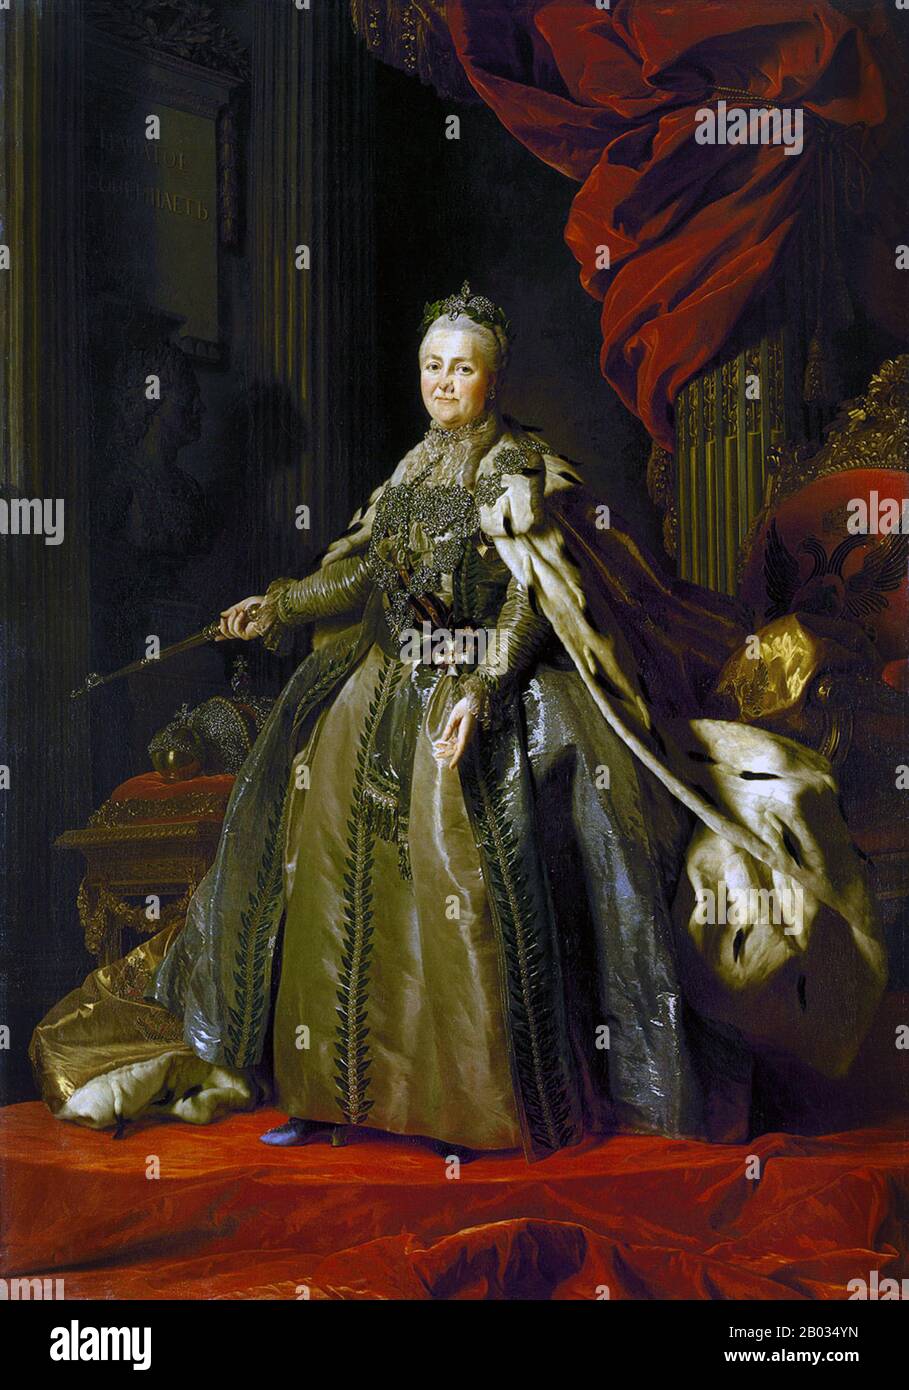 Catherine II of Russia (Russian: Yekaterina Alekseyevna, 2 May 1729 – 17 November 1796), was the most renowned and the longest-ruling female ruler of Russia, reigning from 1762 until her death in 1796 at the age of 67.  Born in Stettin, Pomerania, Prussia as Sophie Friederike Auguste von Anhalt-Zerbst-Dornburg, she came to power following a coup d'état when her husband, Peter III, was assassinated. Russia was revitalised under her reign, growing larger and stronger than ever and becoming recognised as one of the great powers of Europe. Stock Photo